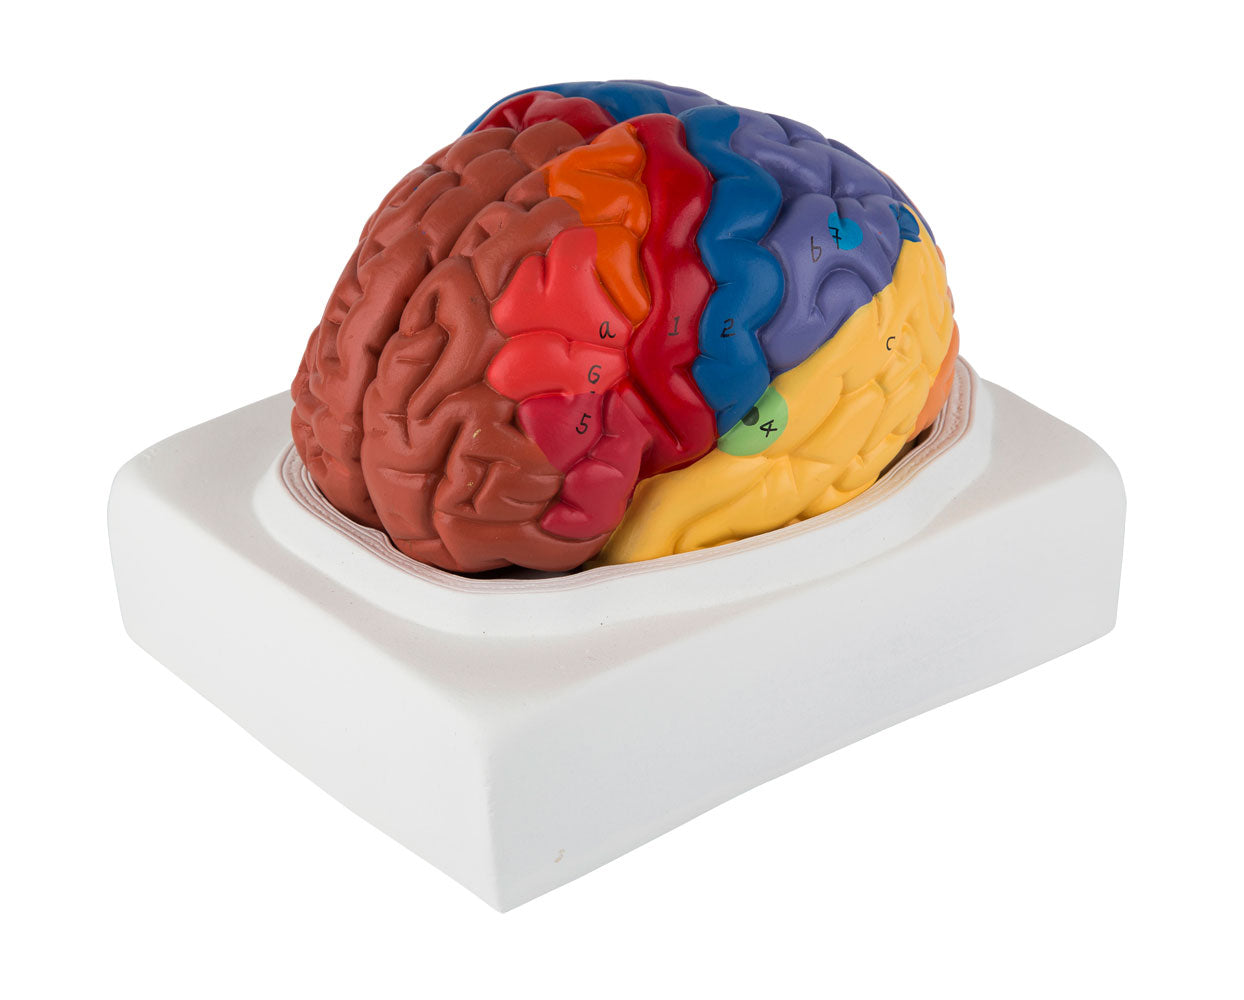 Simple brain model with the most important areas in educational colors. Can be separated into 2 parts